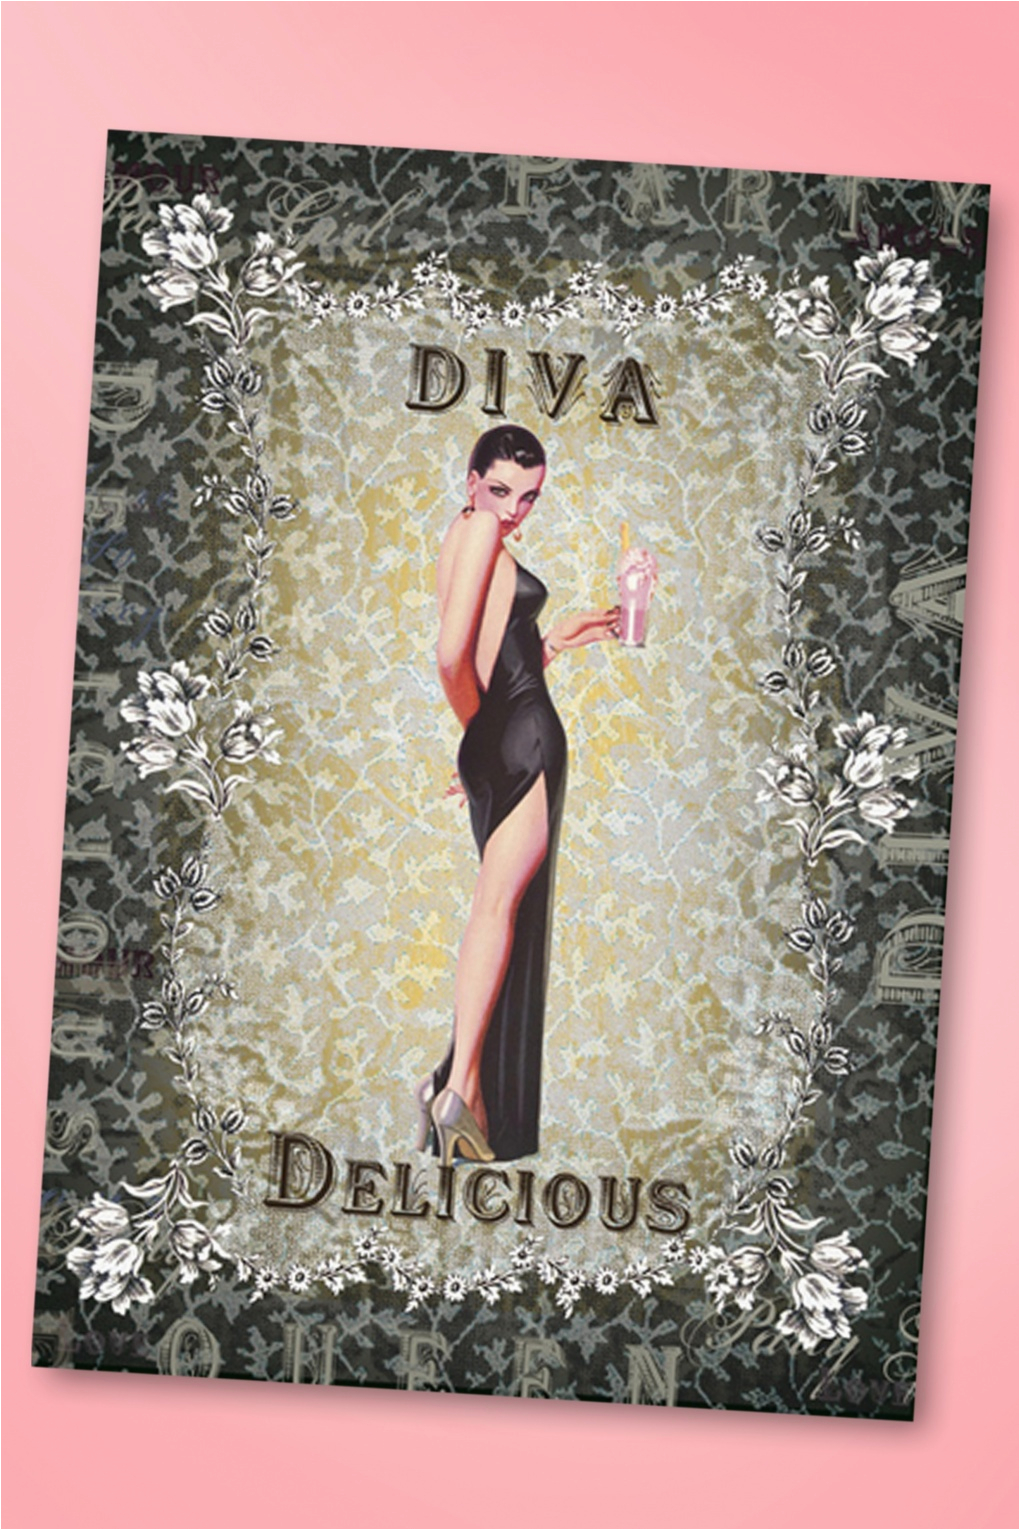 50s diva delicious greeting card